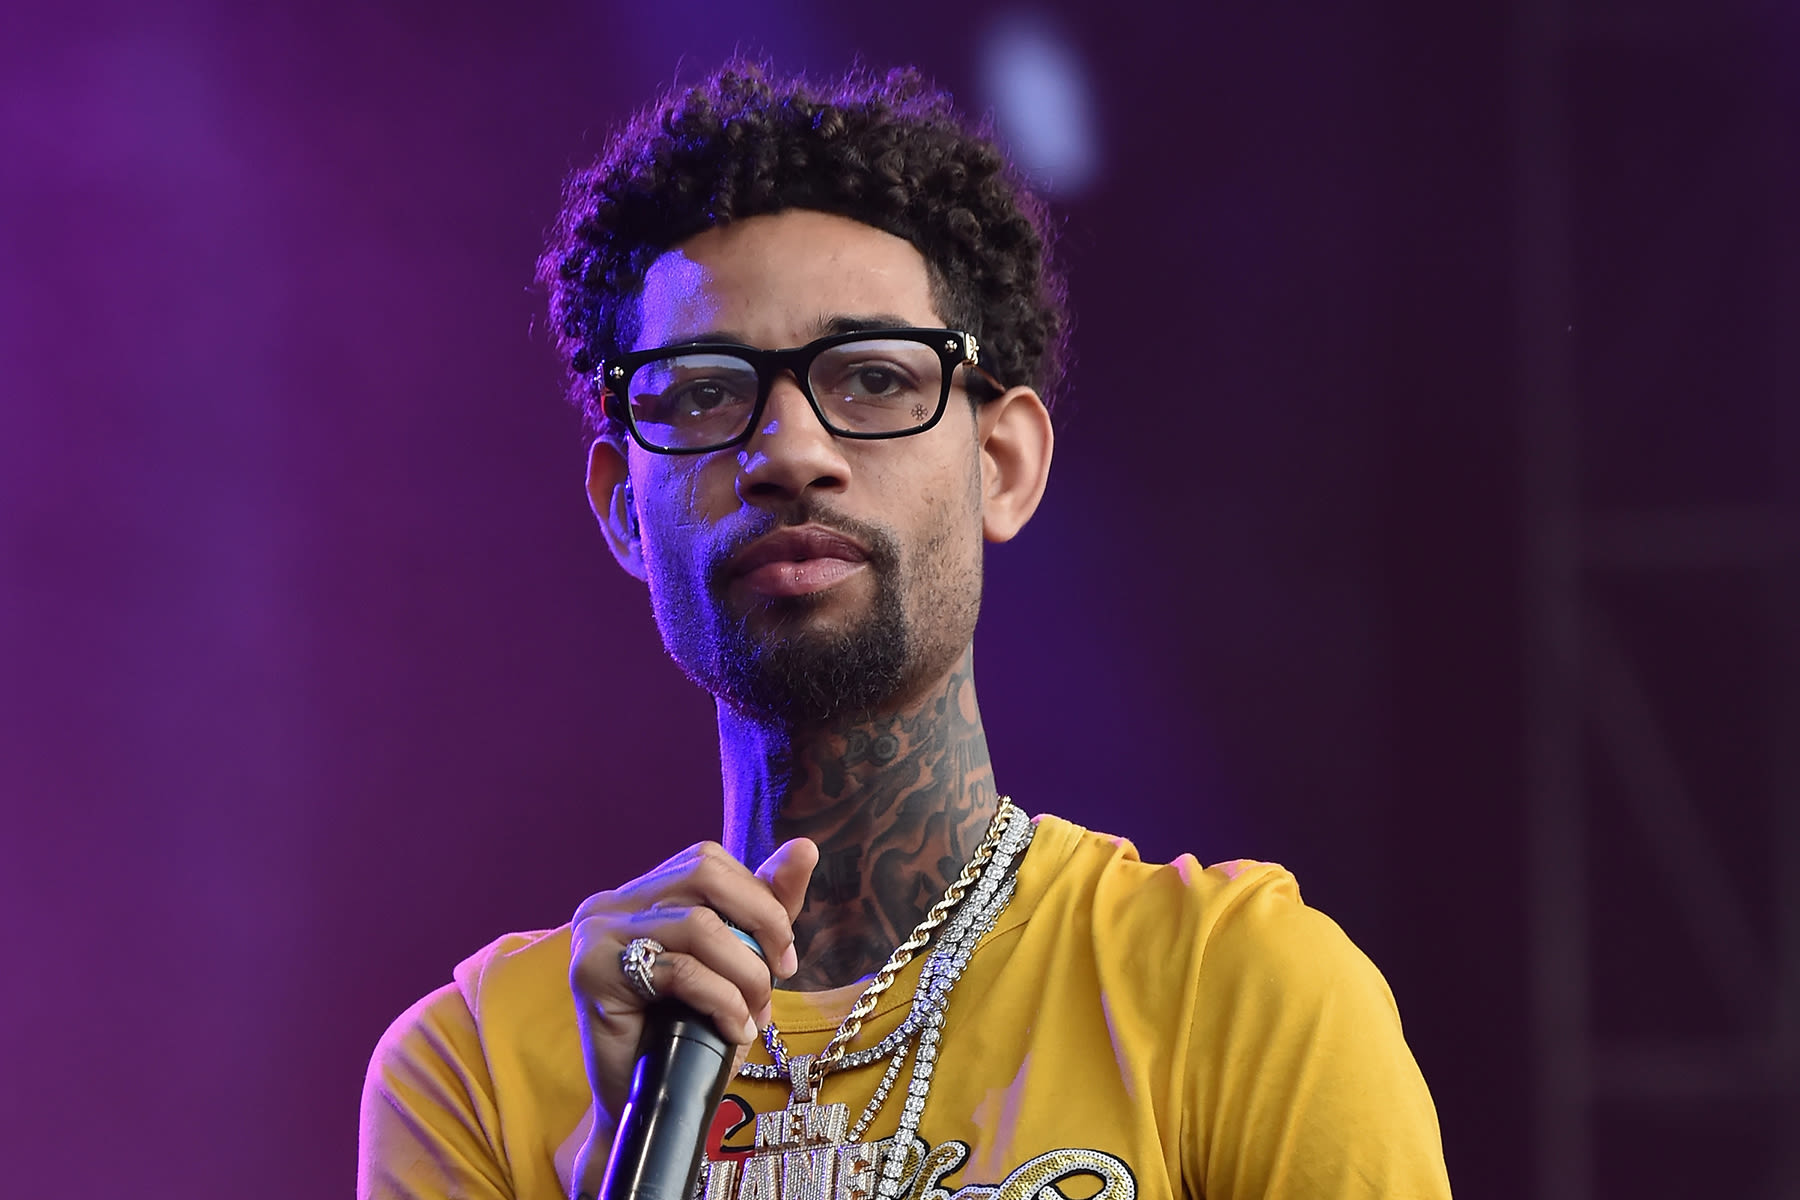 PnB Rock Murder Trial: Mom Weeps in Court, Calls Defendant’s Testimony ‘Ridiculous’